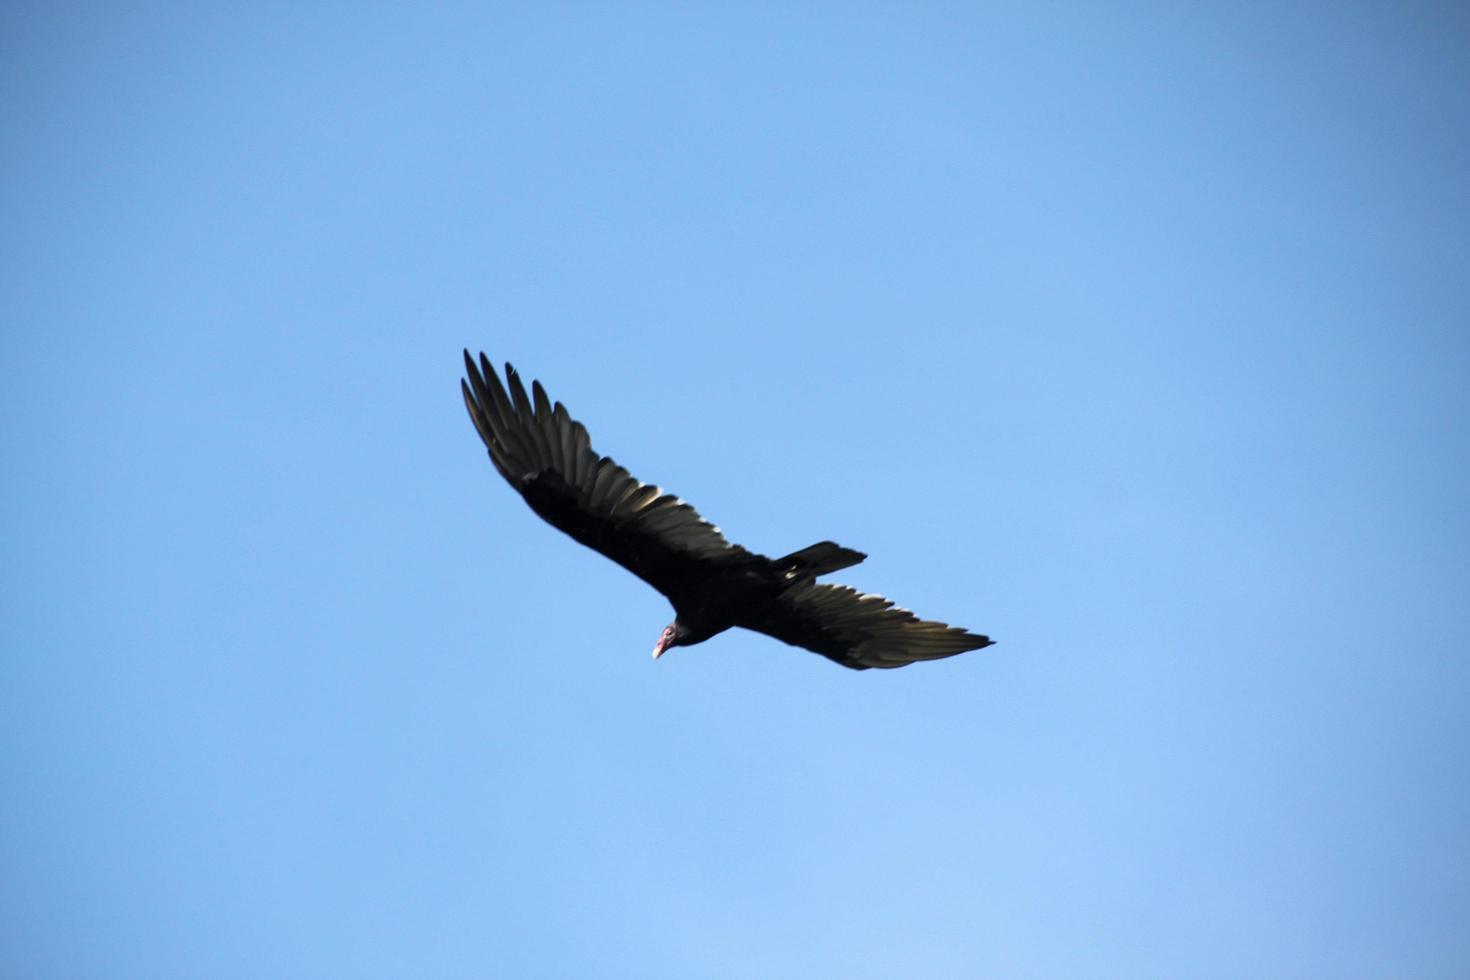 A view of a Turkey Vulture in the Sky photo